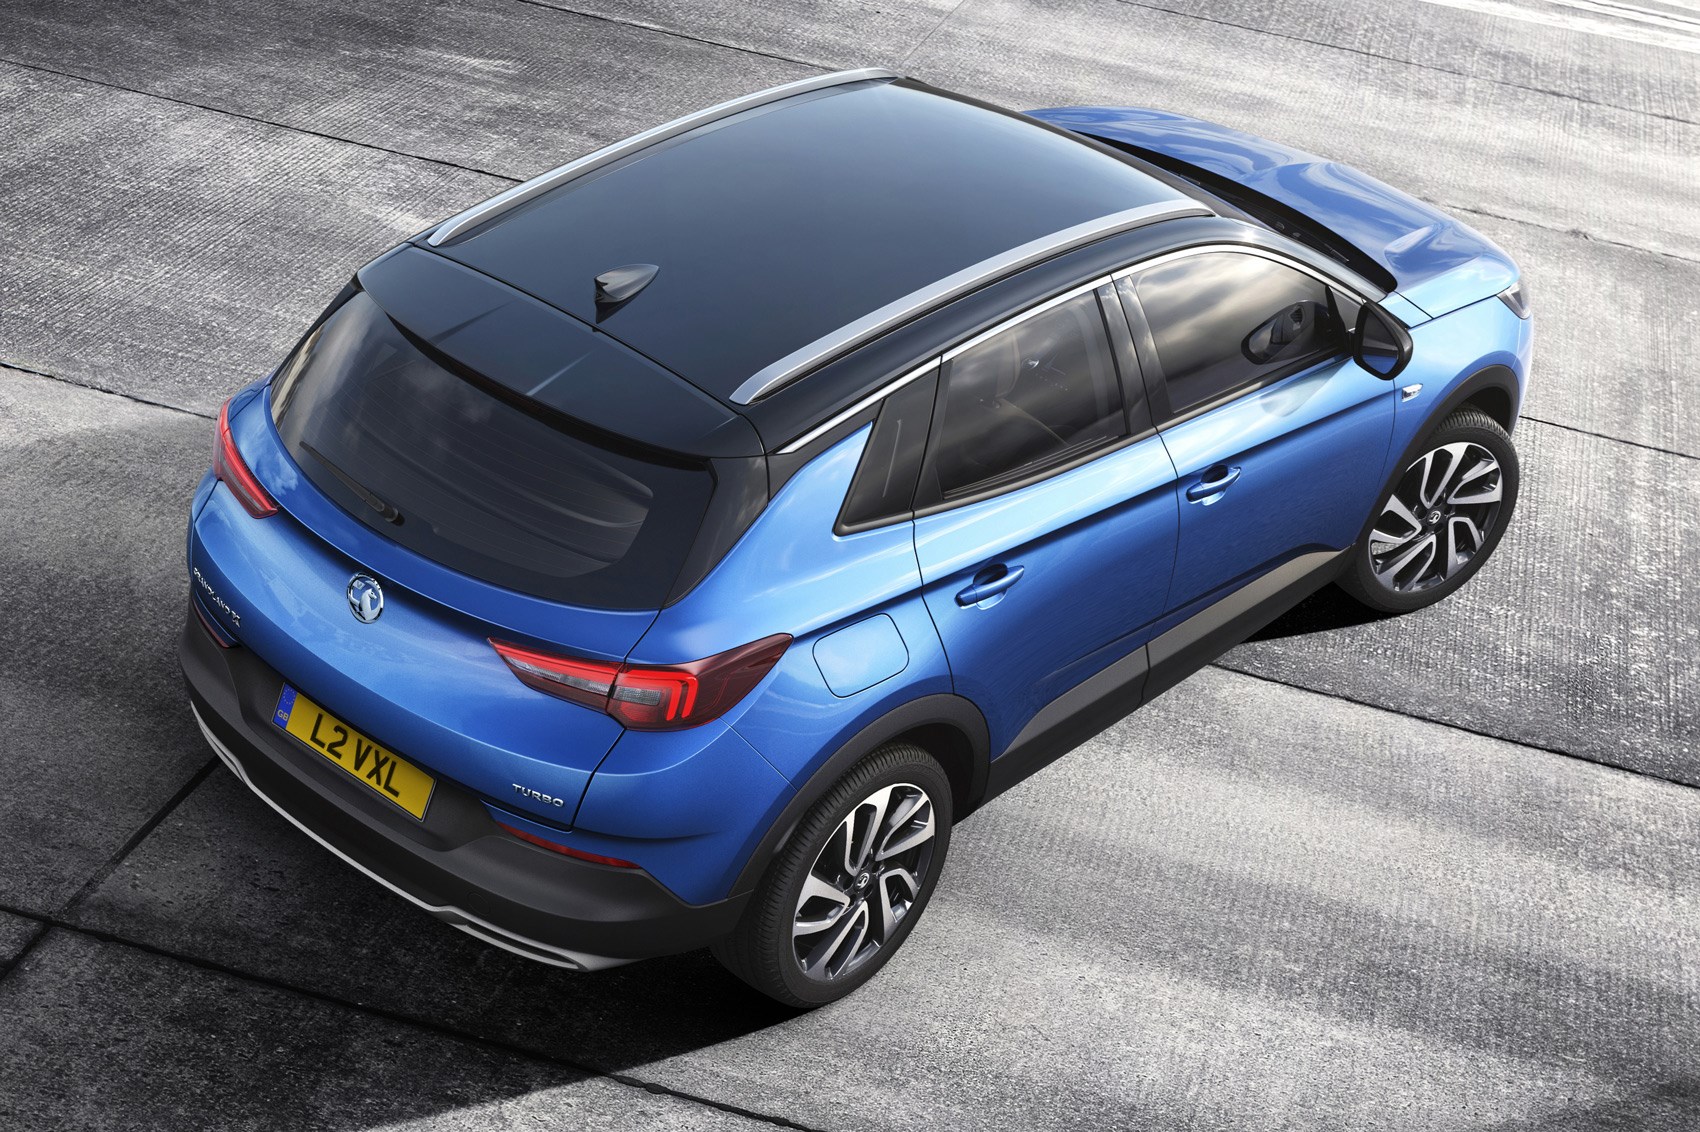 Vauxhall Grandland X Hybrid4 is Griffin's first plug-in